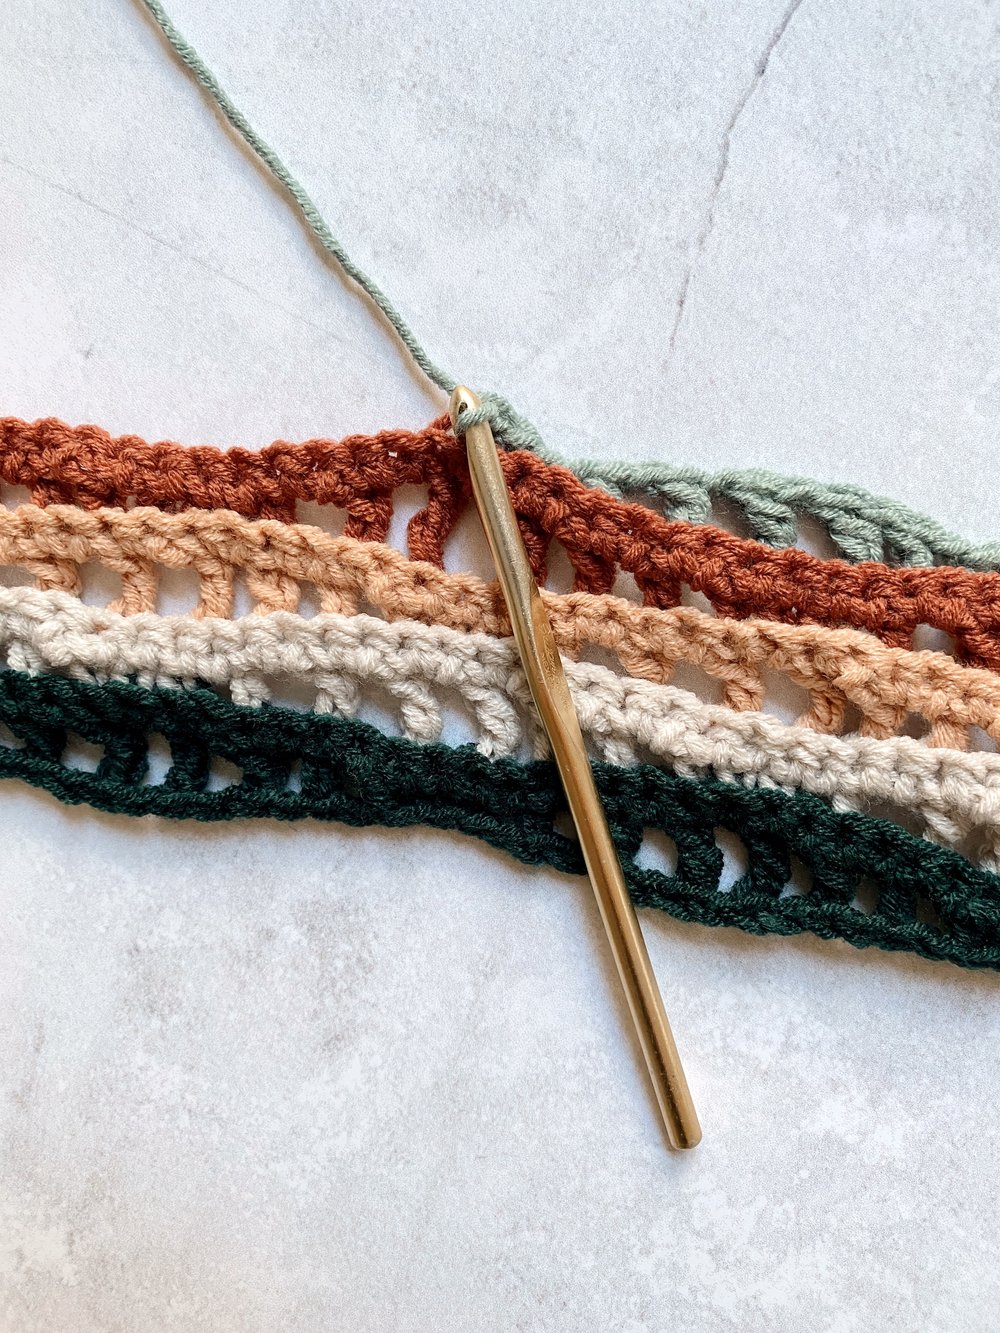 Full Spectrum Wrap pattern by Two of Wands